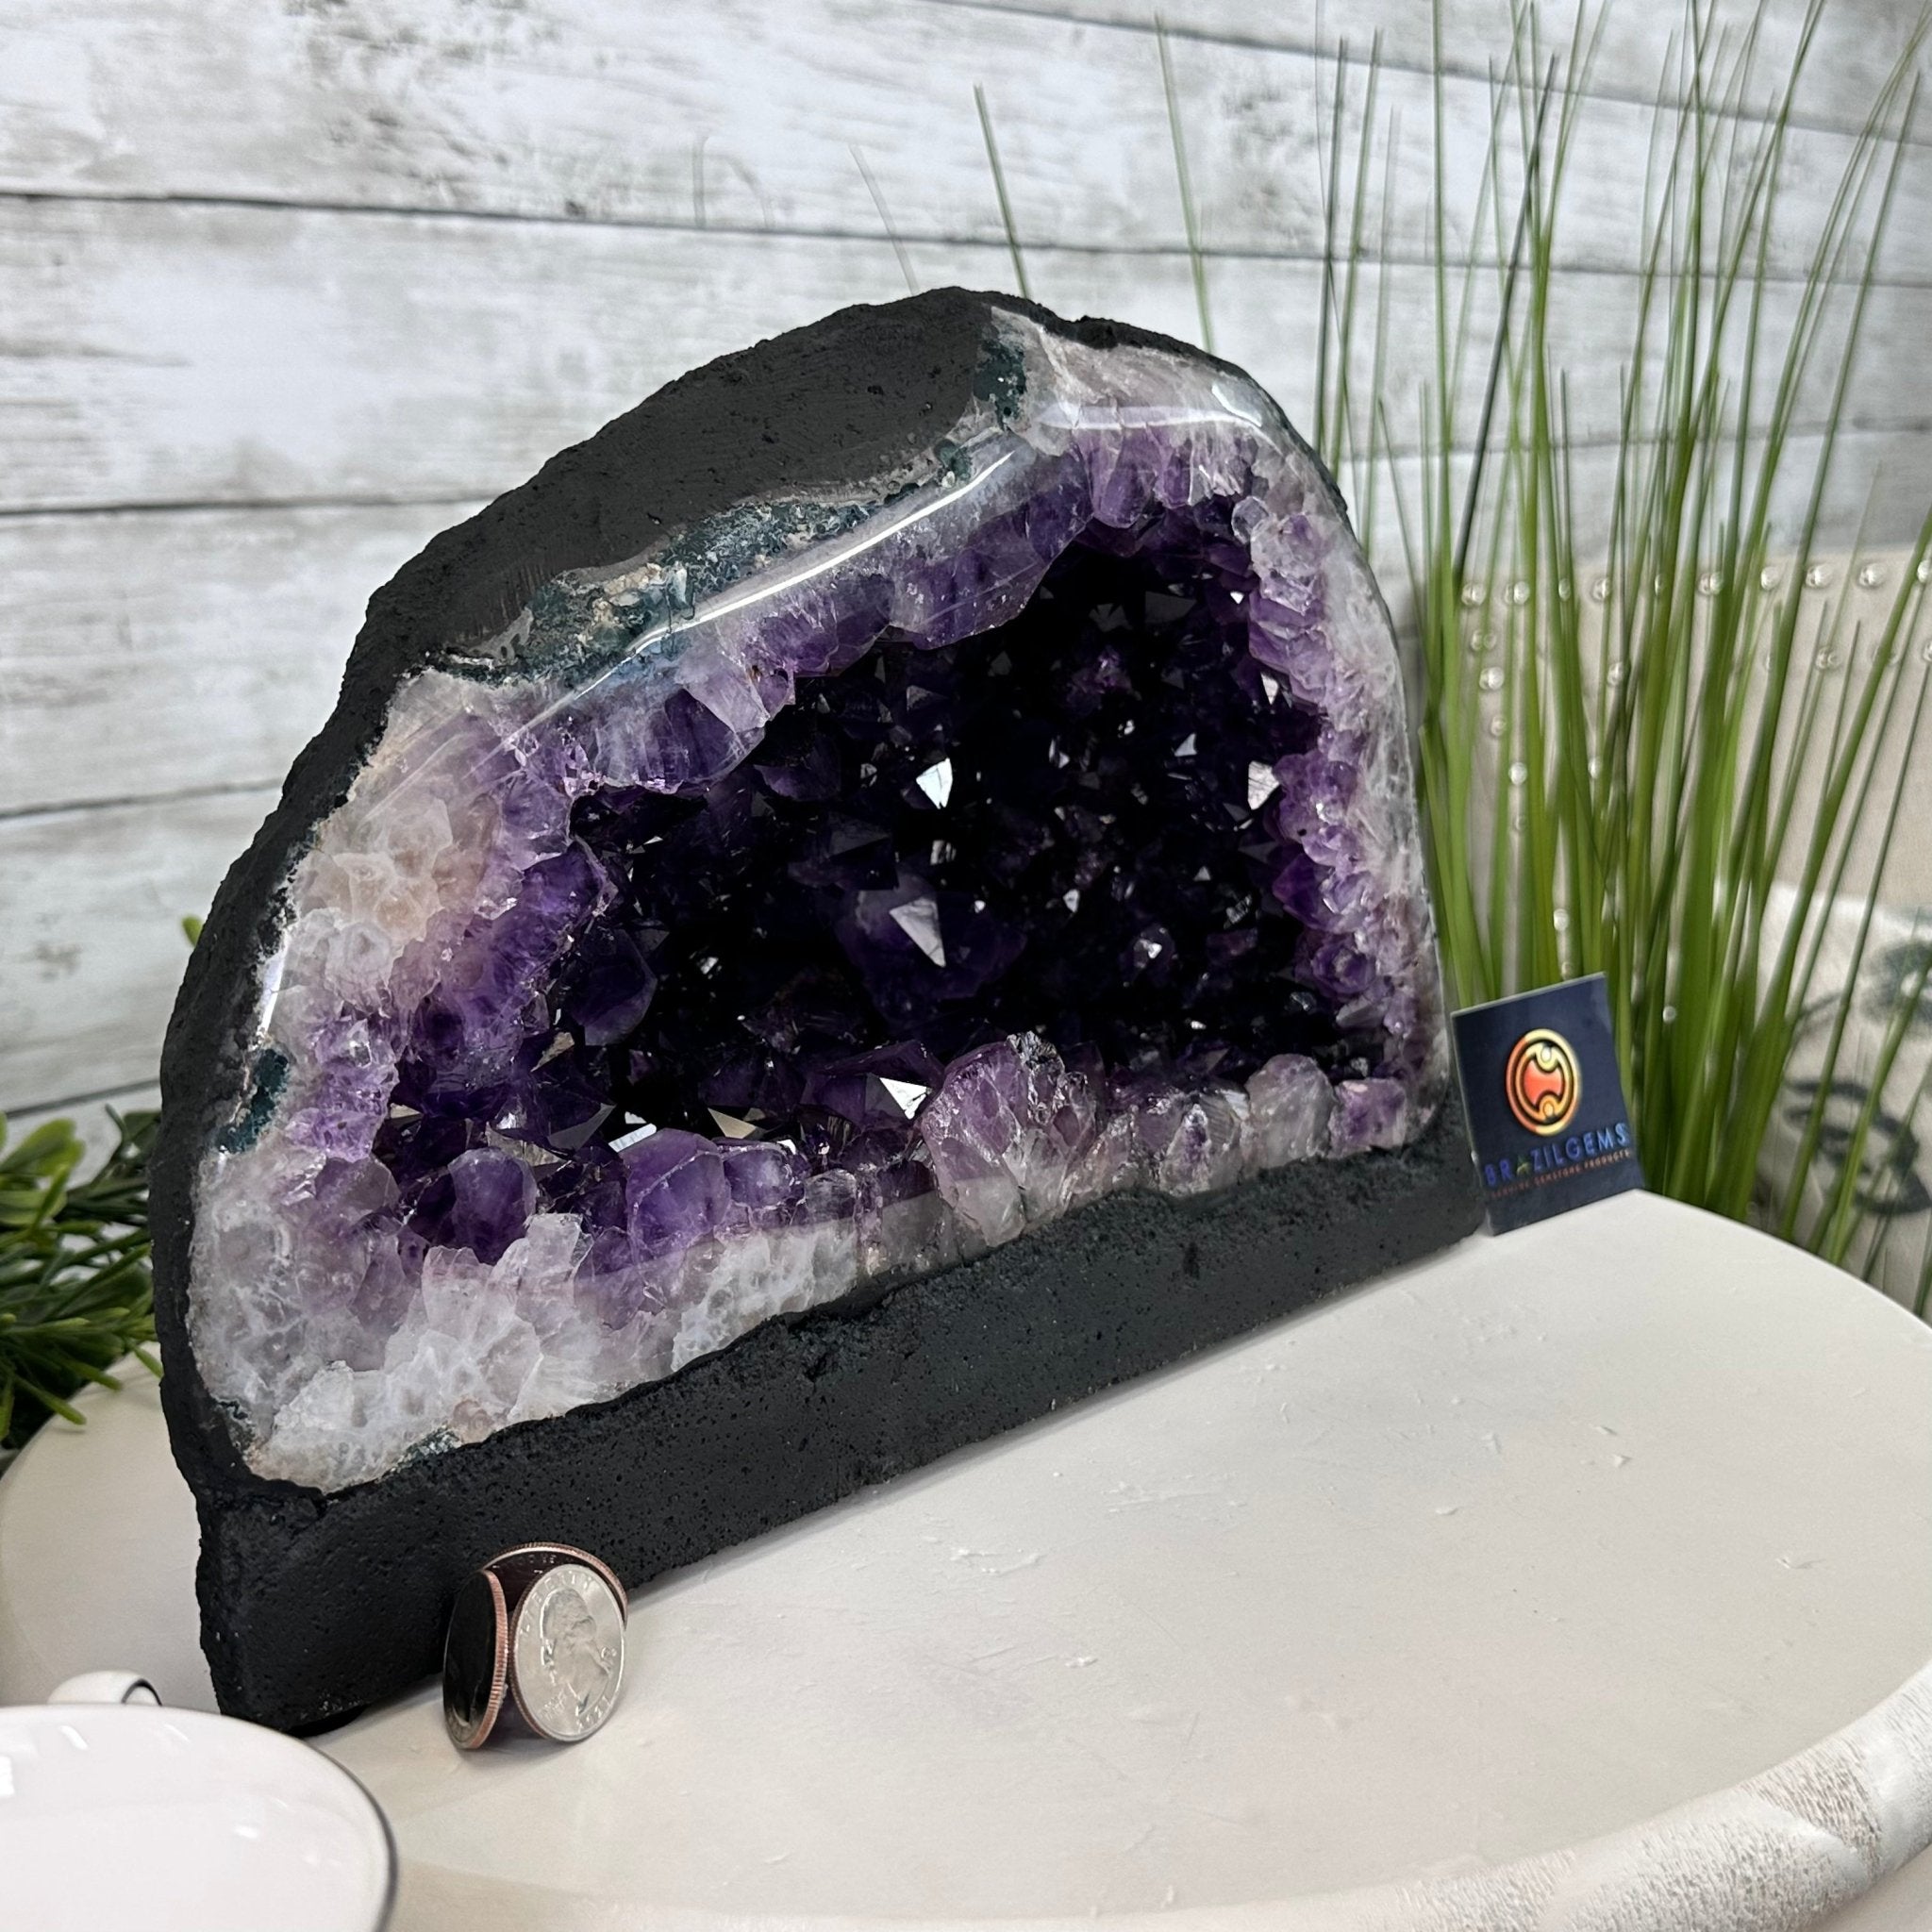 Extra Plus Quality Brazilian Amethyst Cathedral, 21.2 lbs & 8" Tall, Model #5601-1282 by Brazil Gems - Brazil GemsBrazil GemsExtra Plus Quality Brazilian Amethyst Cathedral, 21.2 lbs & 8" Tall, Model #5601-1282 by Brazil GemsCathedrals5601-1282